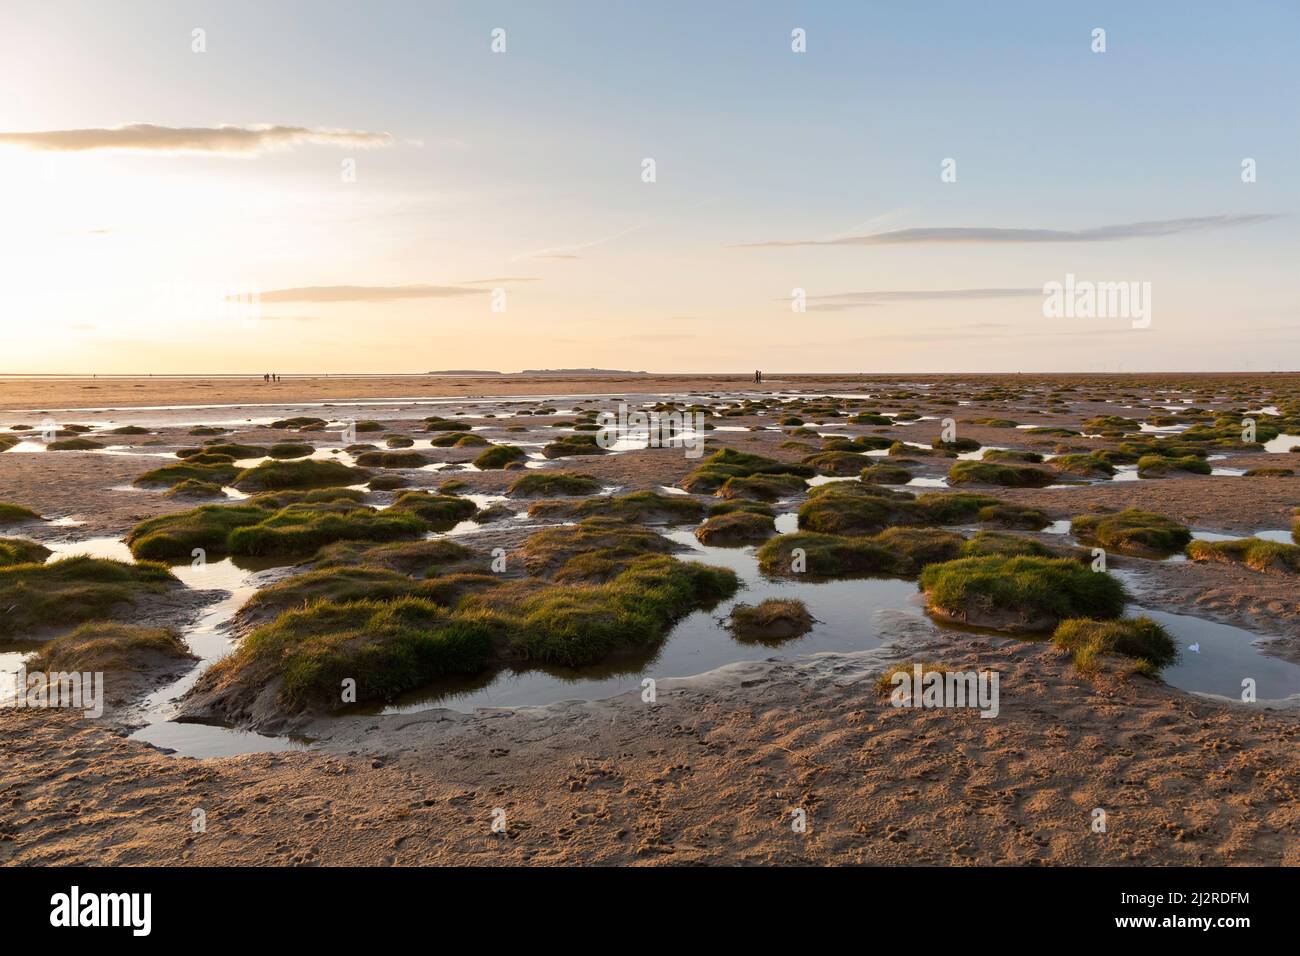 West Kirby, UK: Salt marsh and sand at low tide on the Dee estuary, Hilbre island on the horizon. Stock Photo